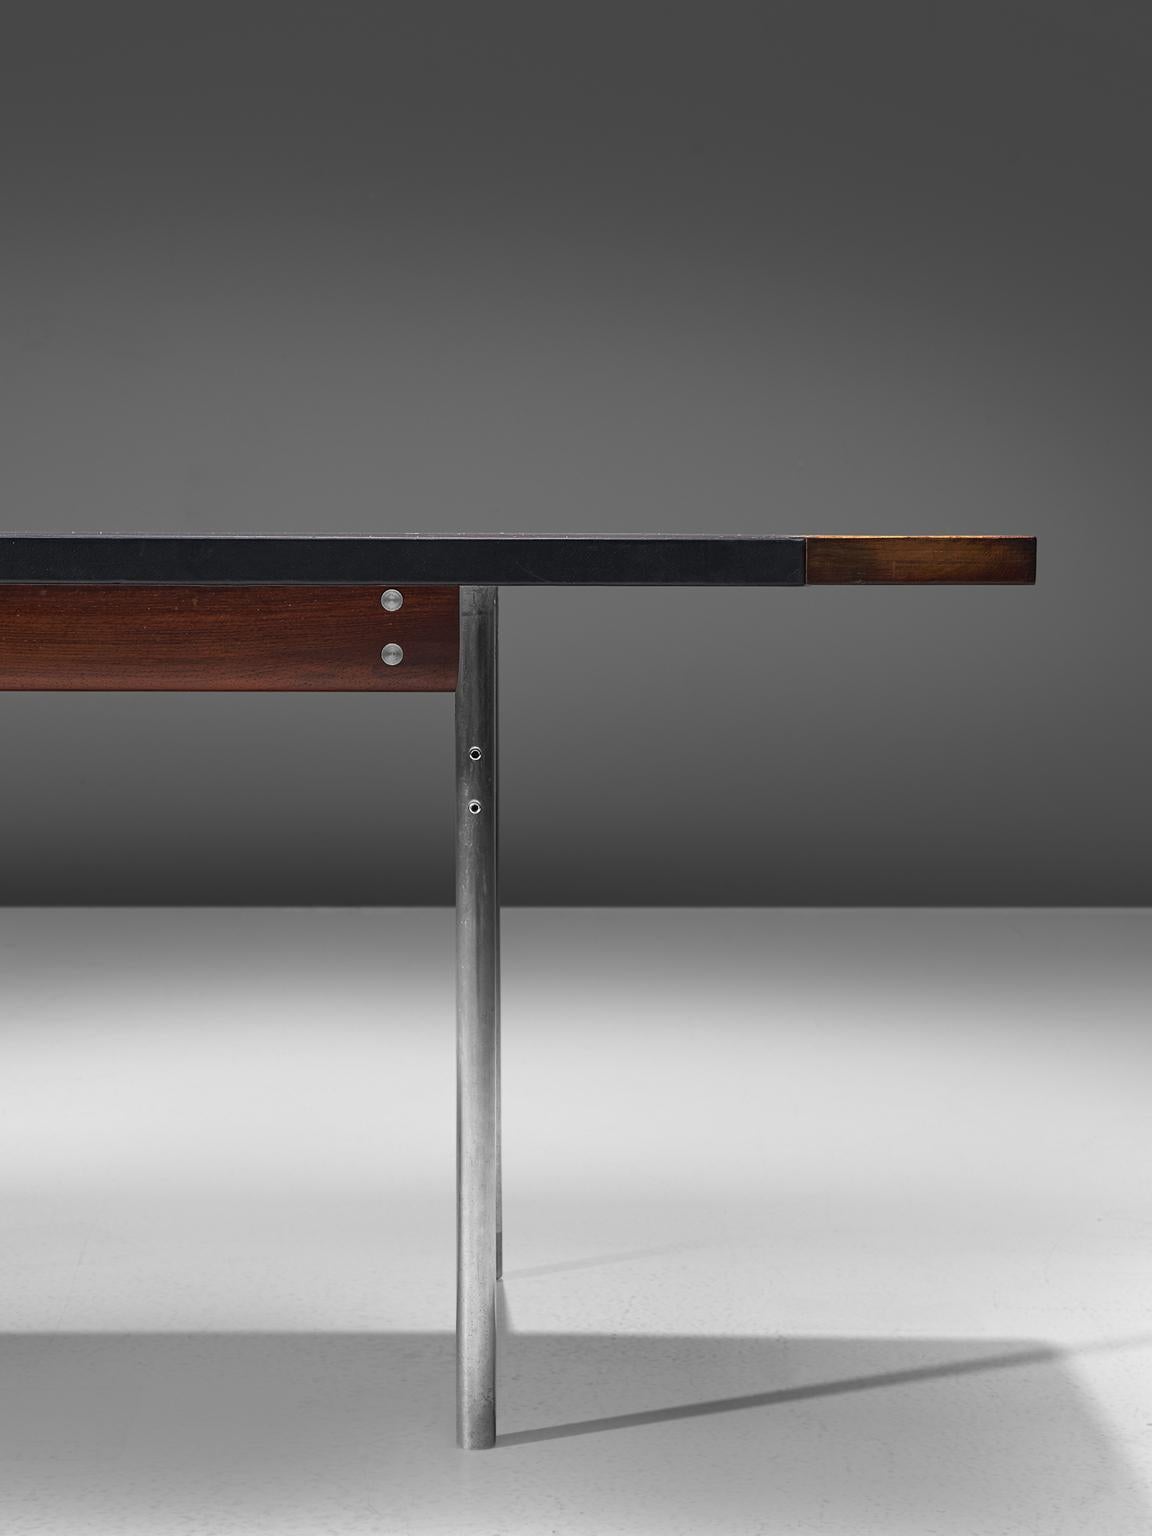 Scandinavian Modern Sven Ivar Dysthe Table in Rosewood and Black Leather